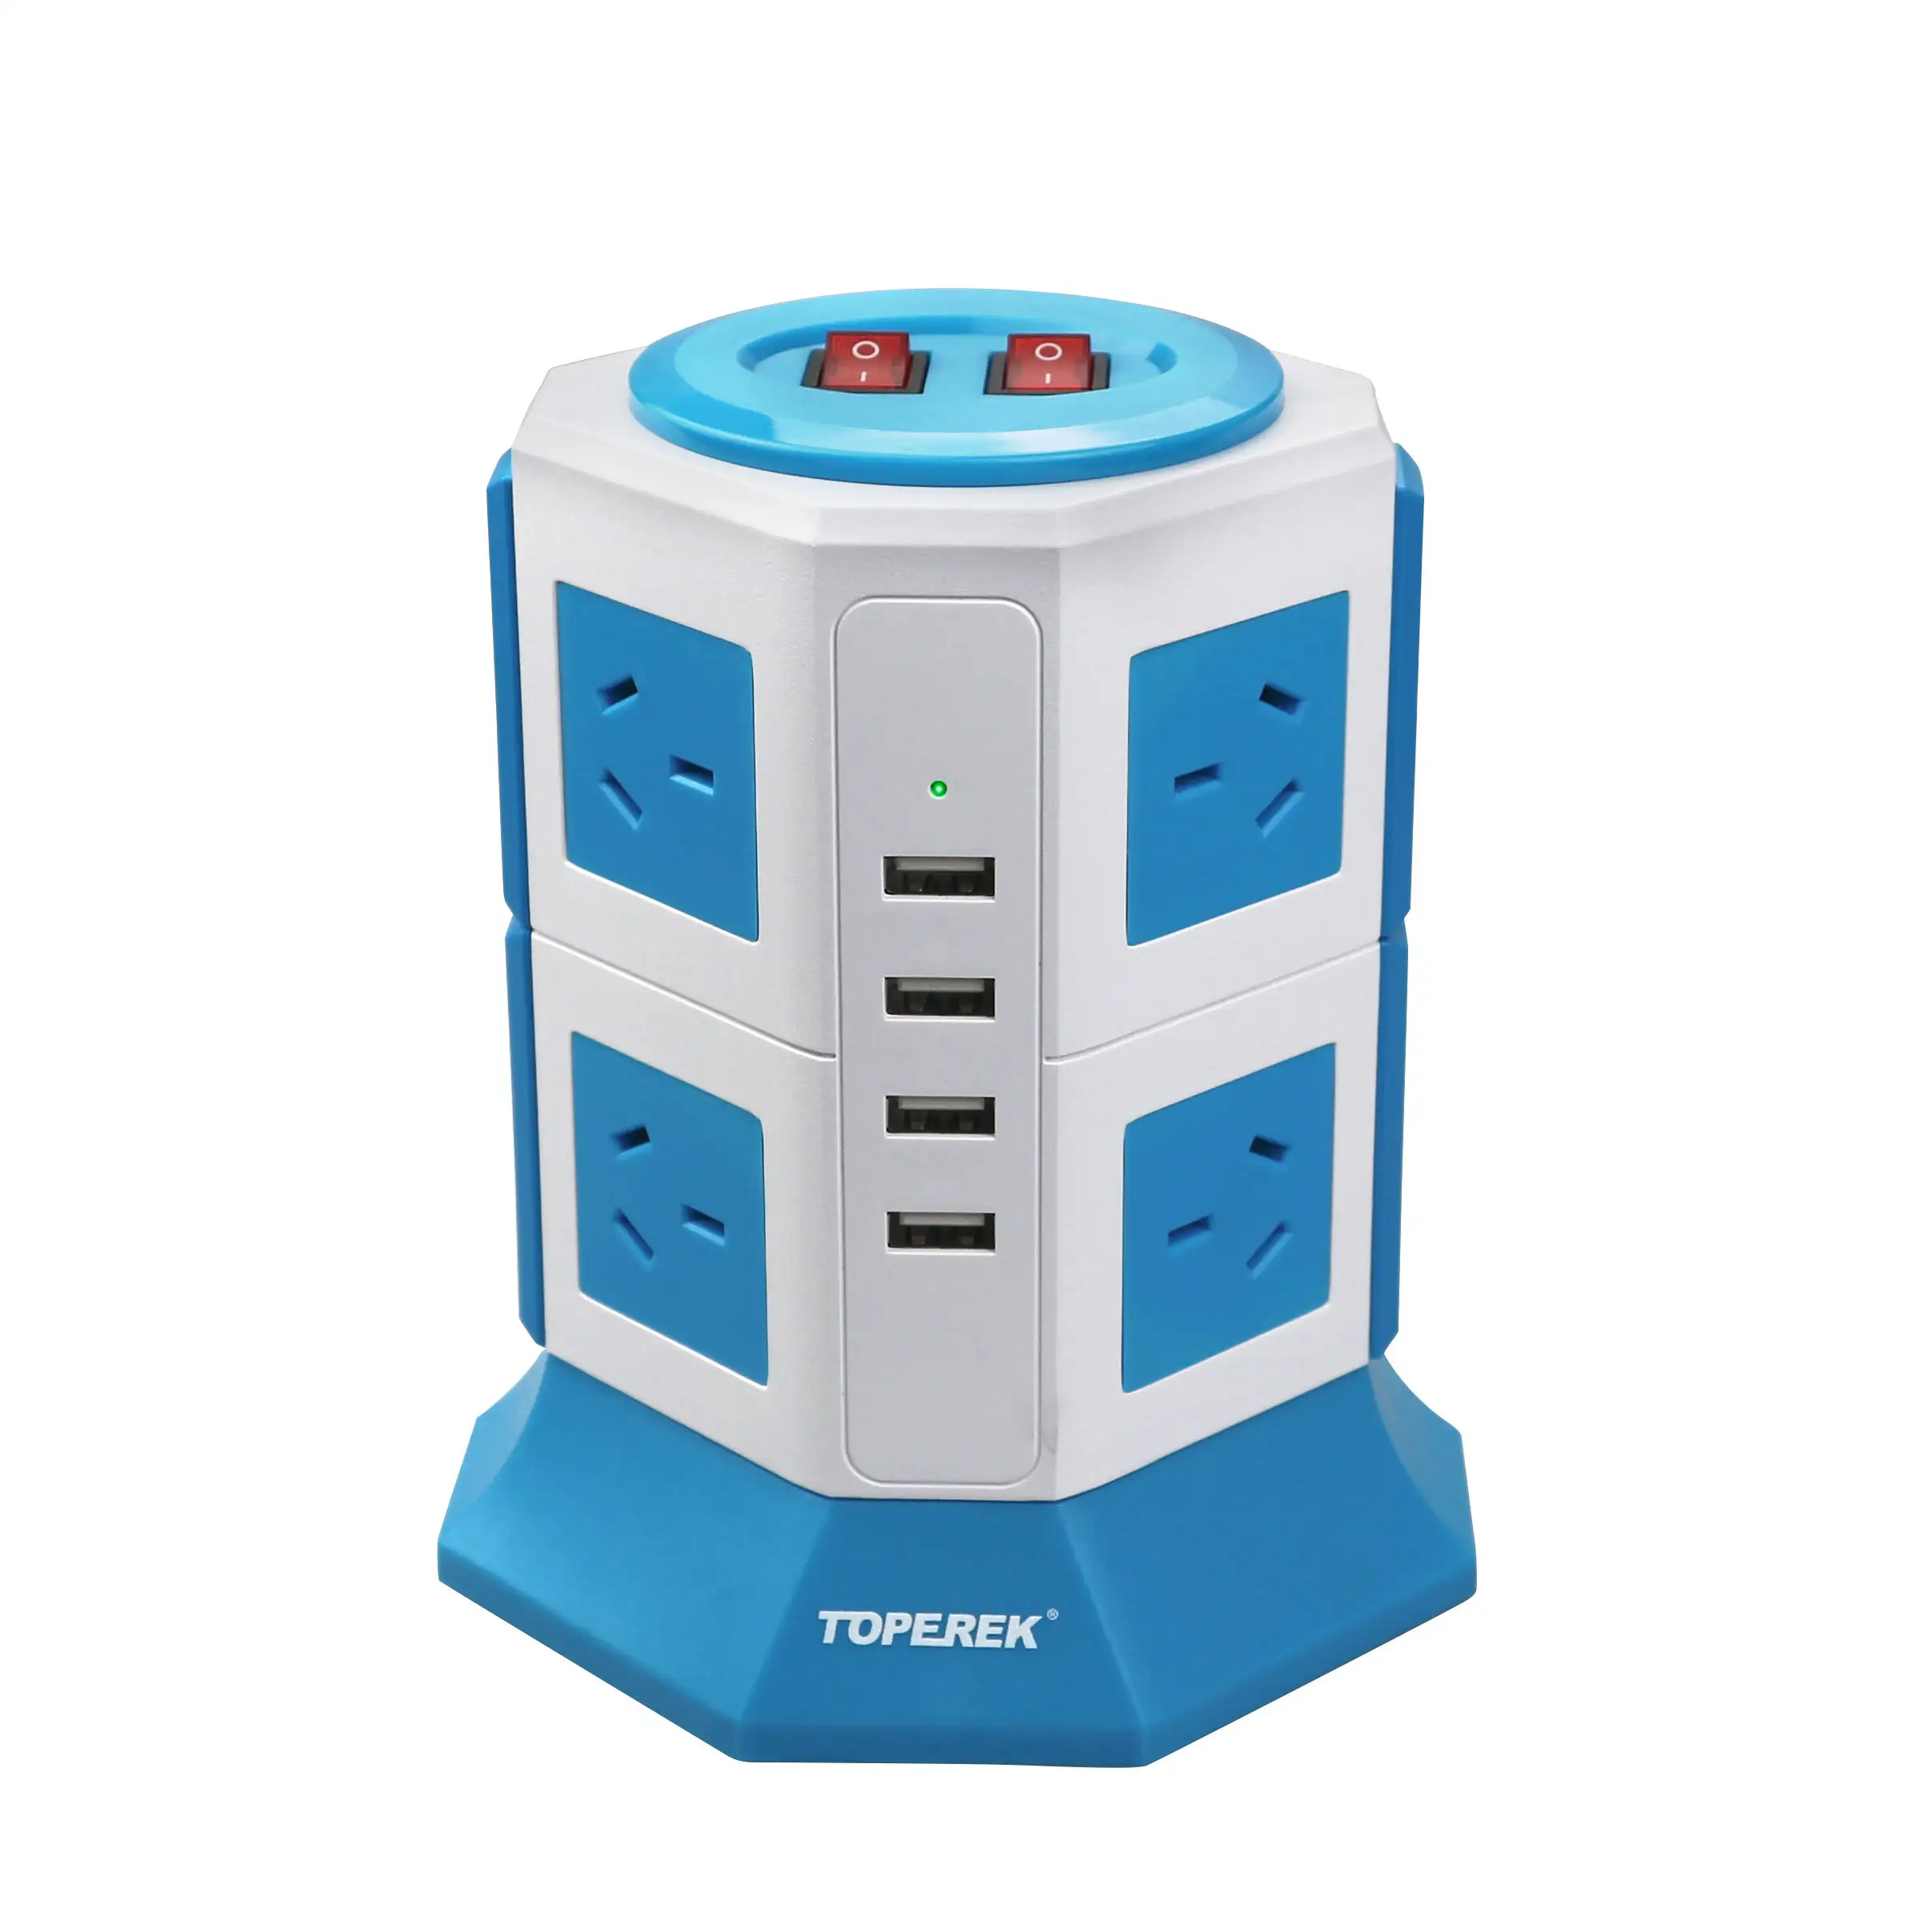 TOPEREK Overload surge protector electric strip 8 outlet AU Plugs and 4 USB power socket